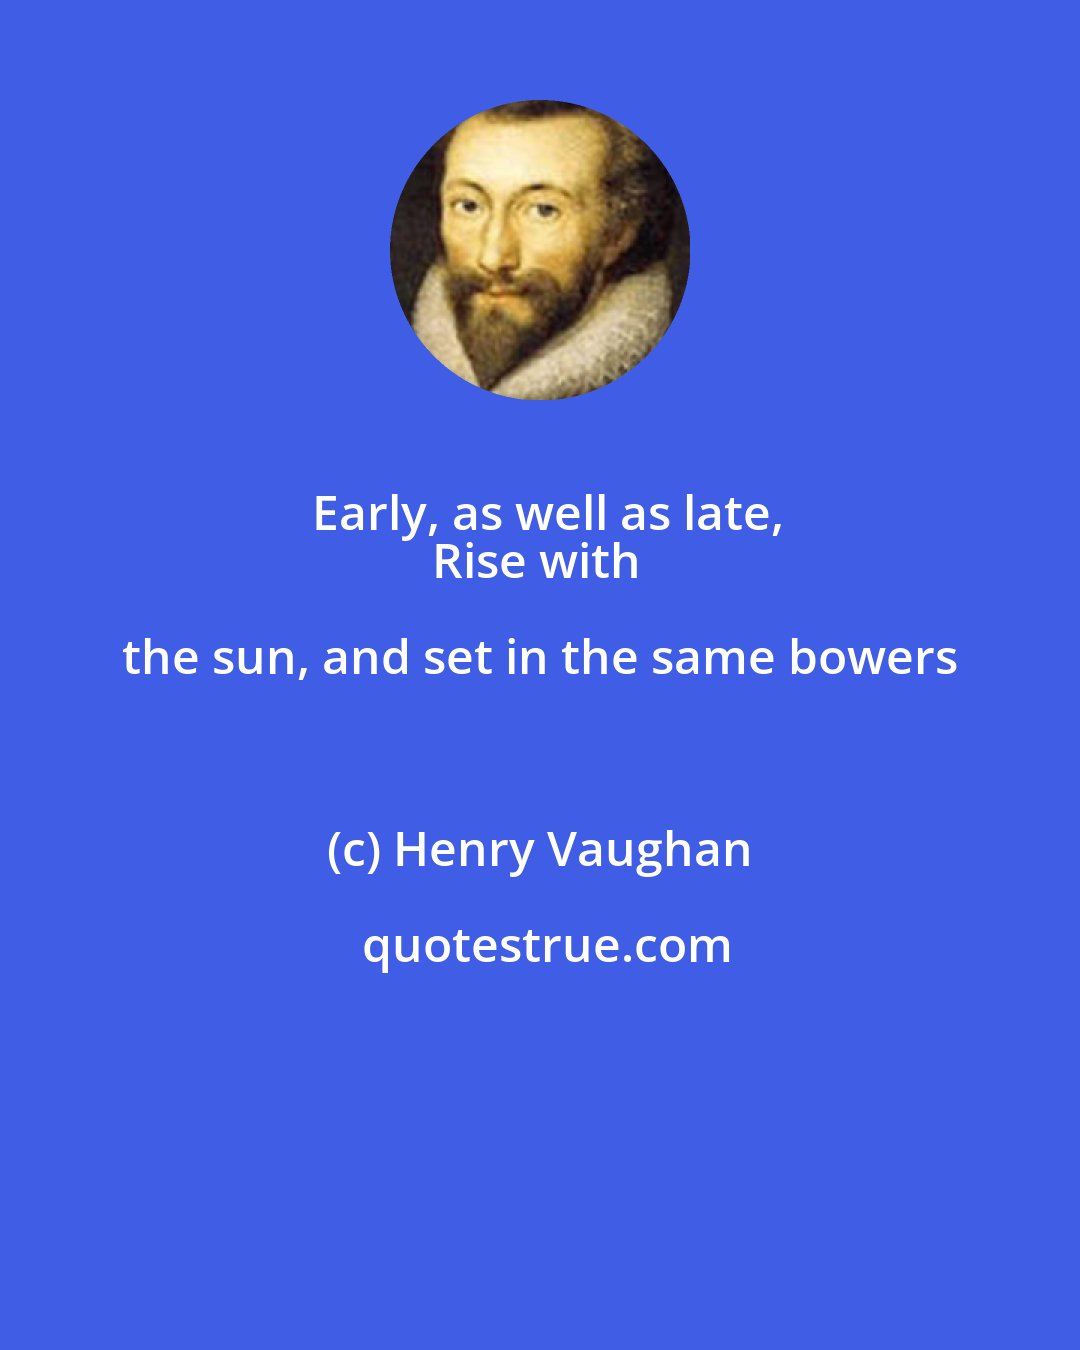 Henry Vaughan: Early, as well as late,
Rise with the sun, and set in the same bowers